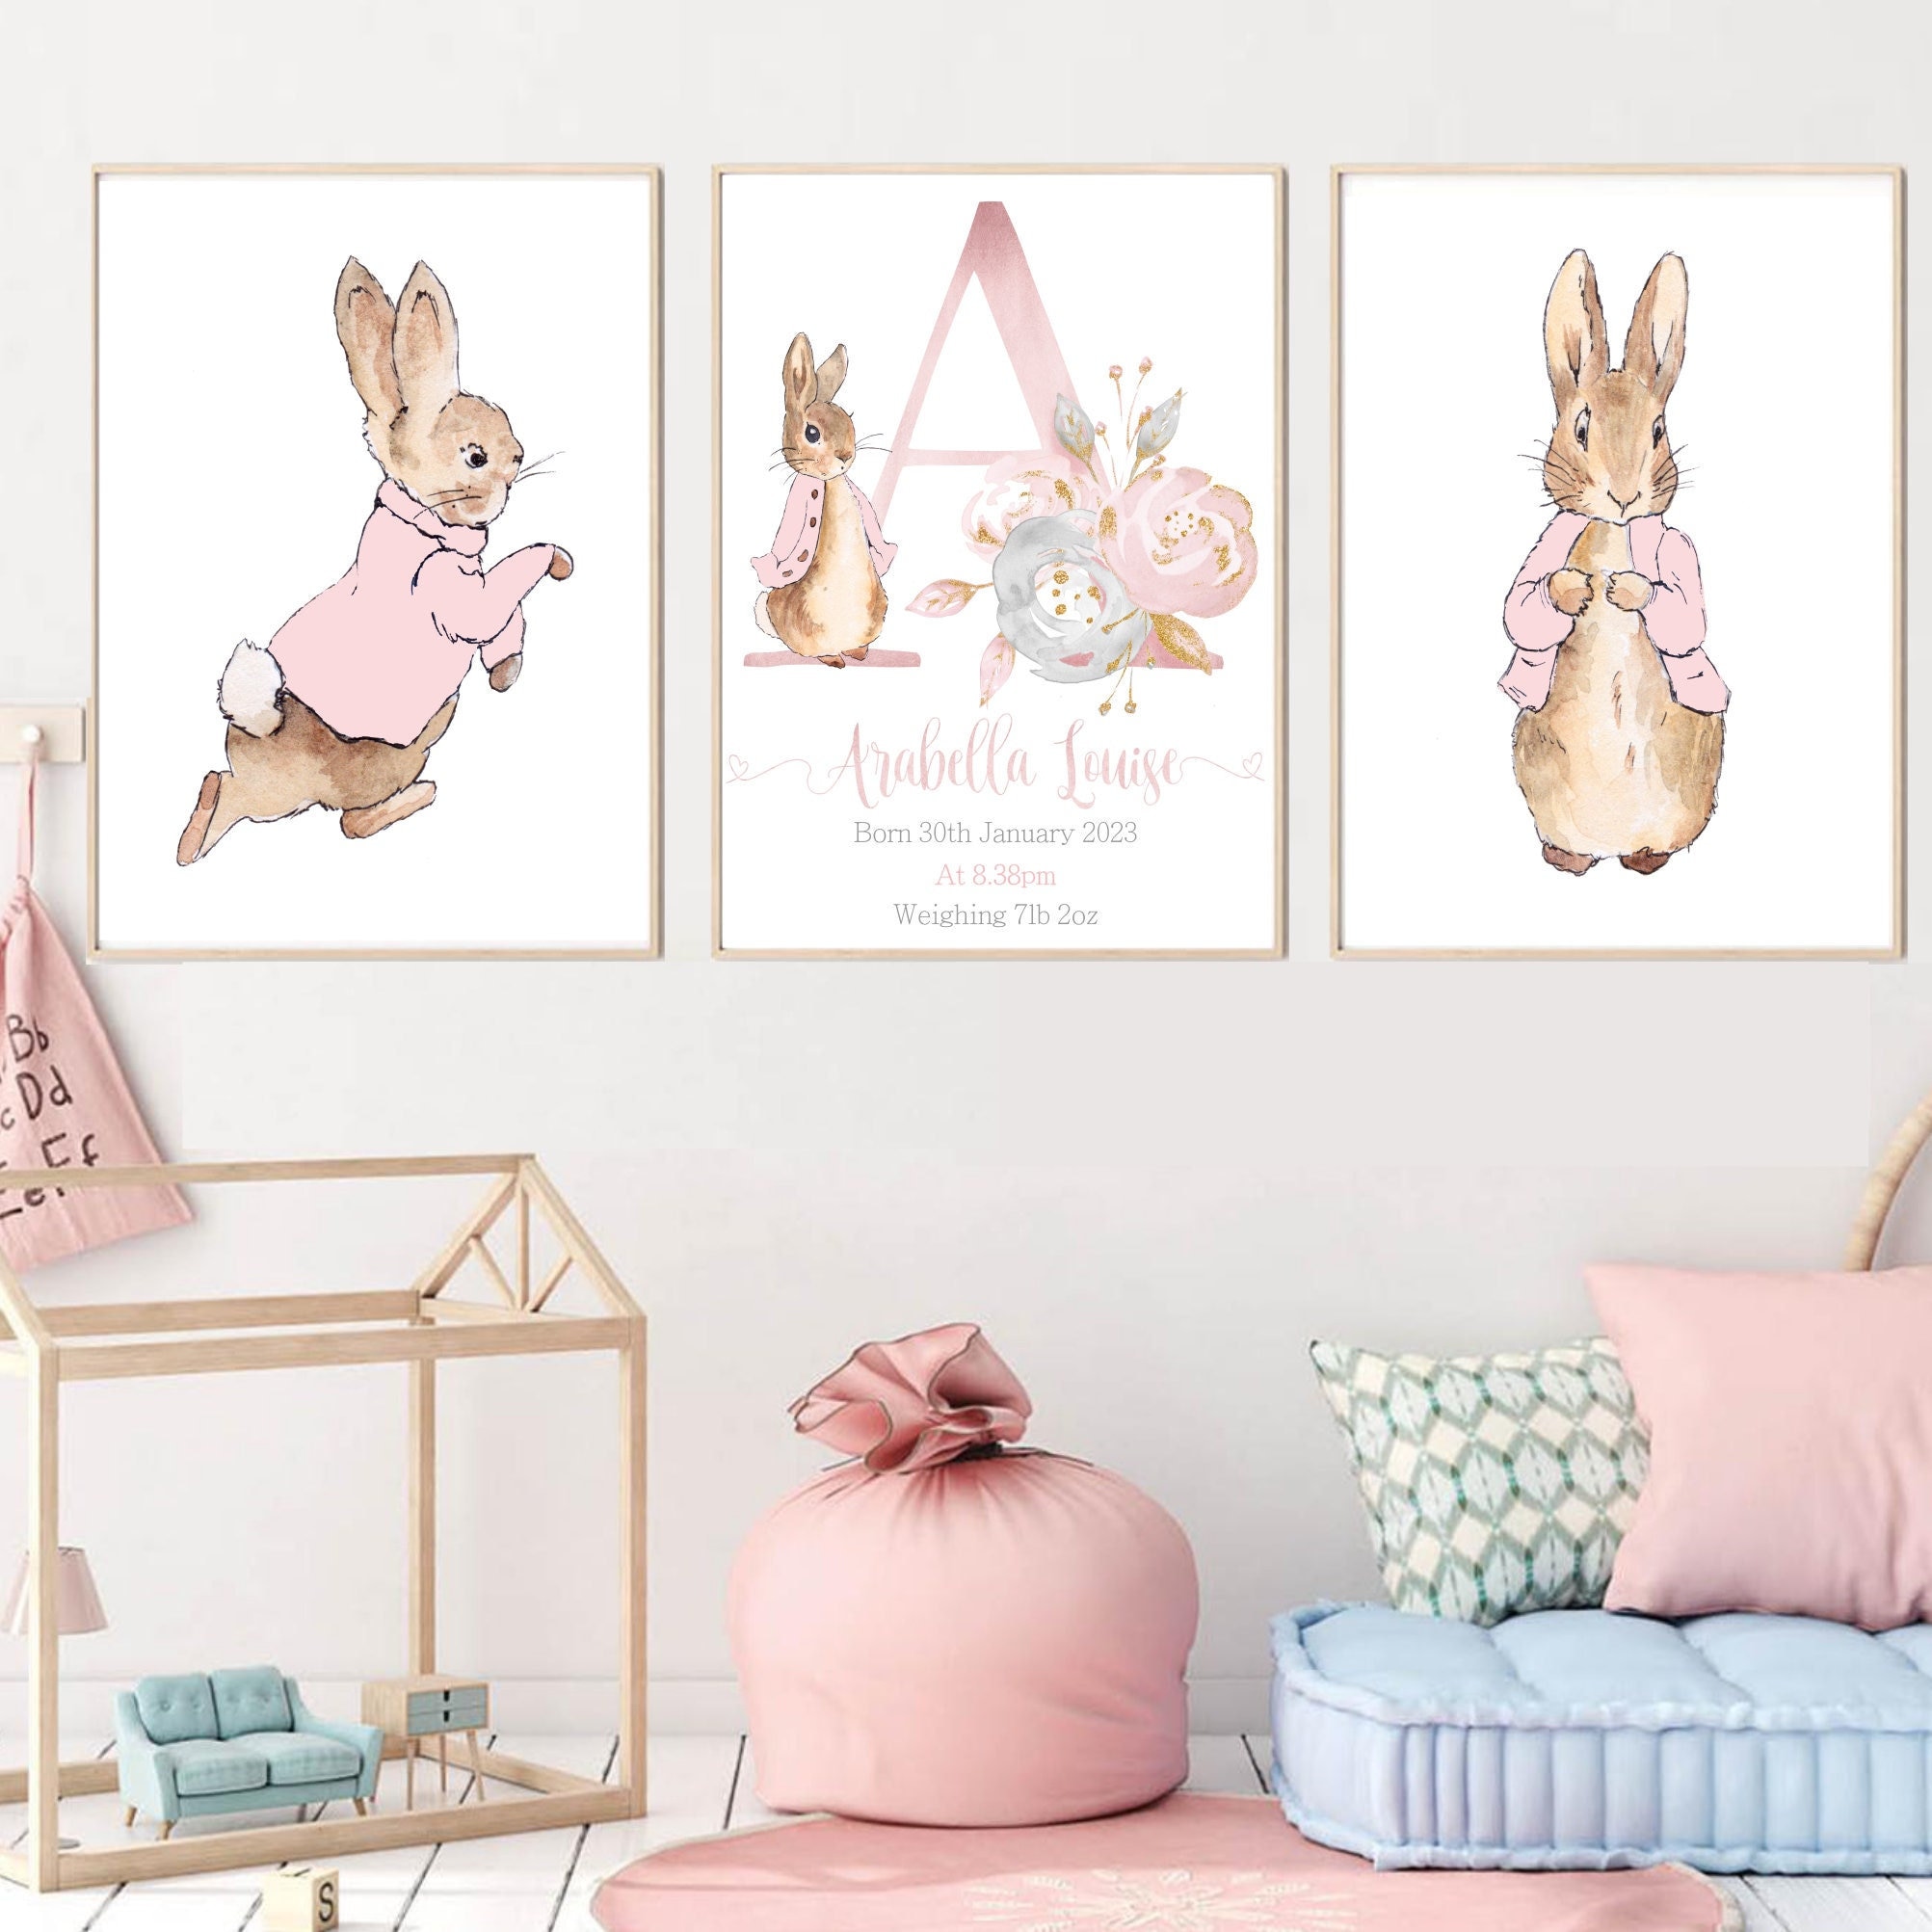  Girls Bedroom Wall Decor,The Velveteen Rabbit Quote Sign,Book  Page Wall Art,Literature Gifts,Inspirational Art,Kid Room Decor,Nursery Wall  Art,Story Book Sign,8x12 Inch Framed Wall Art: Posters & Prints